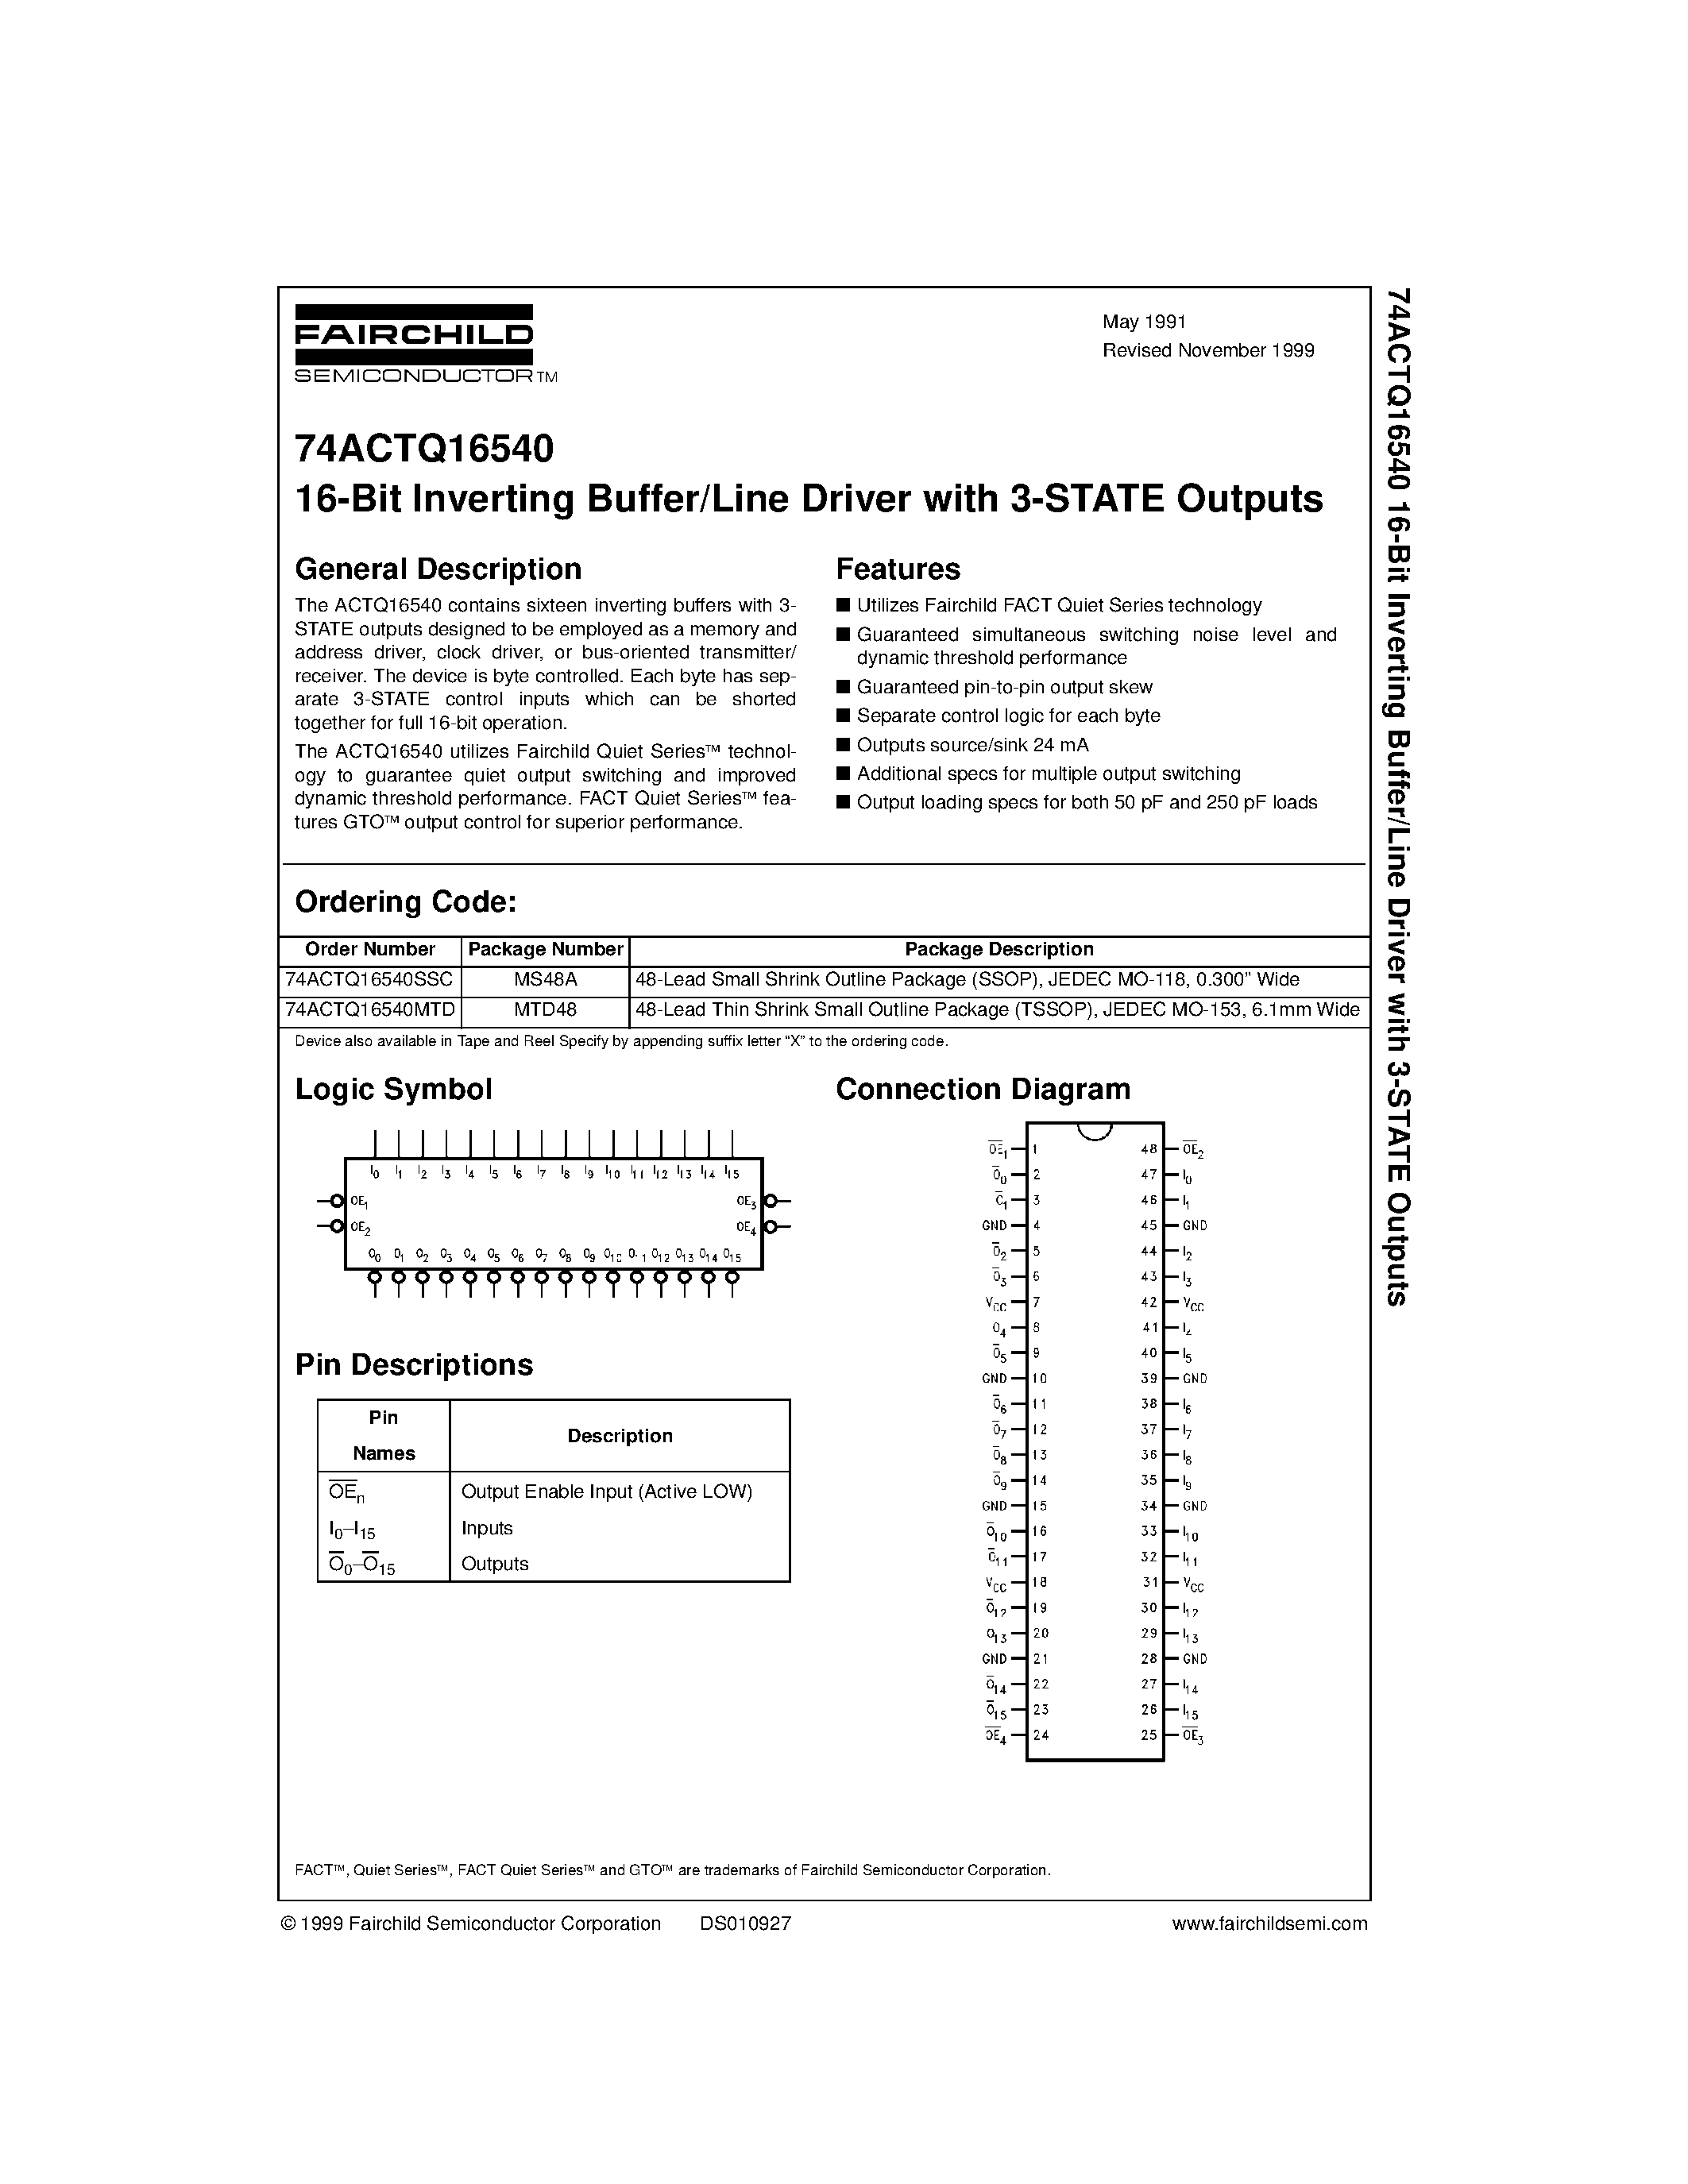 Datasheet 74ACTQ16540 - 16-Bit Inverting Buffer/Line Driver with 3-STATE Outputs page 1